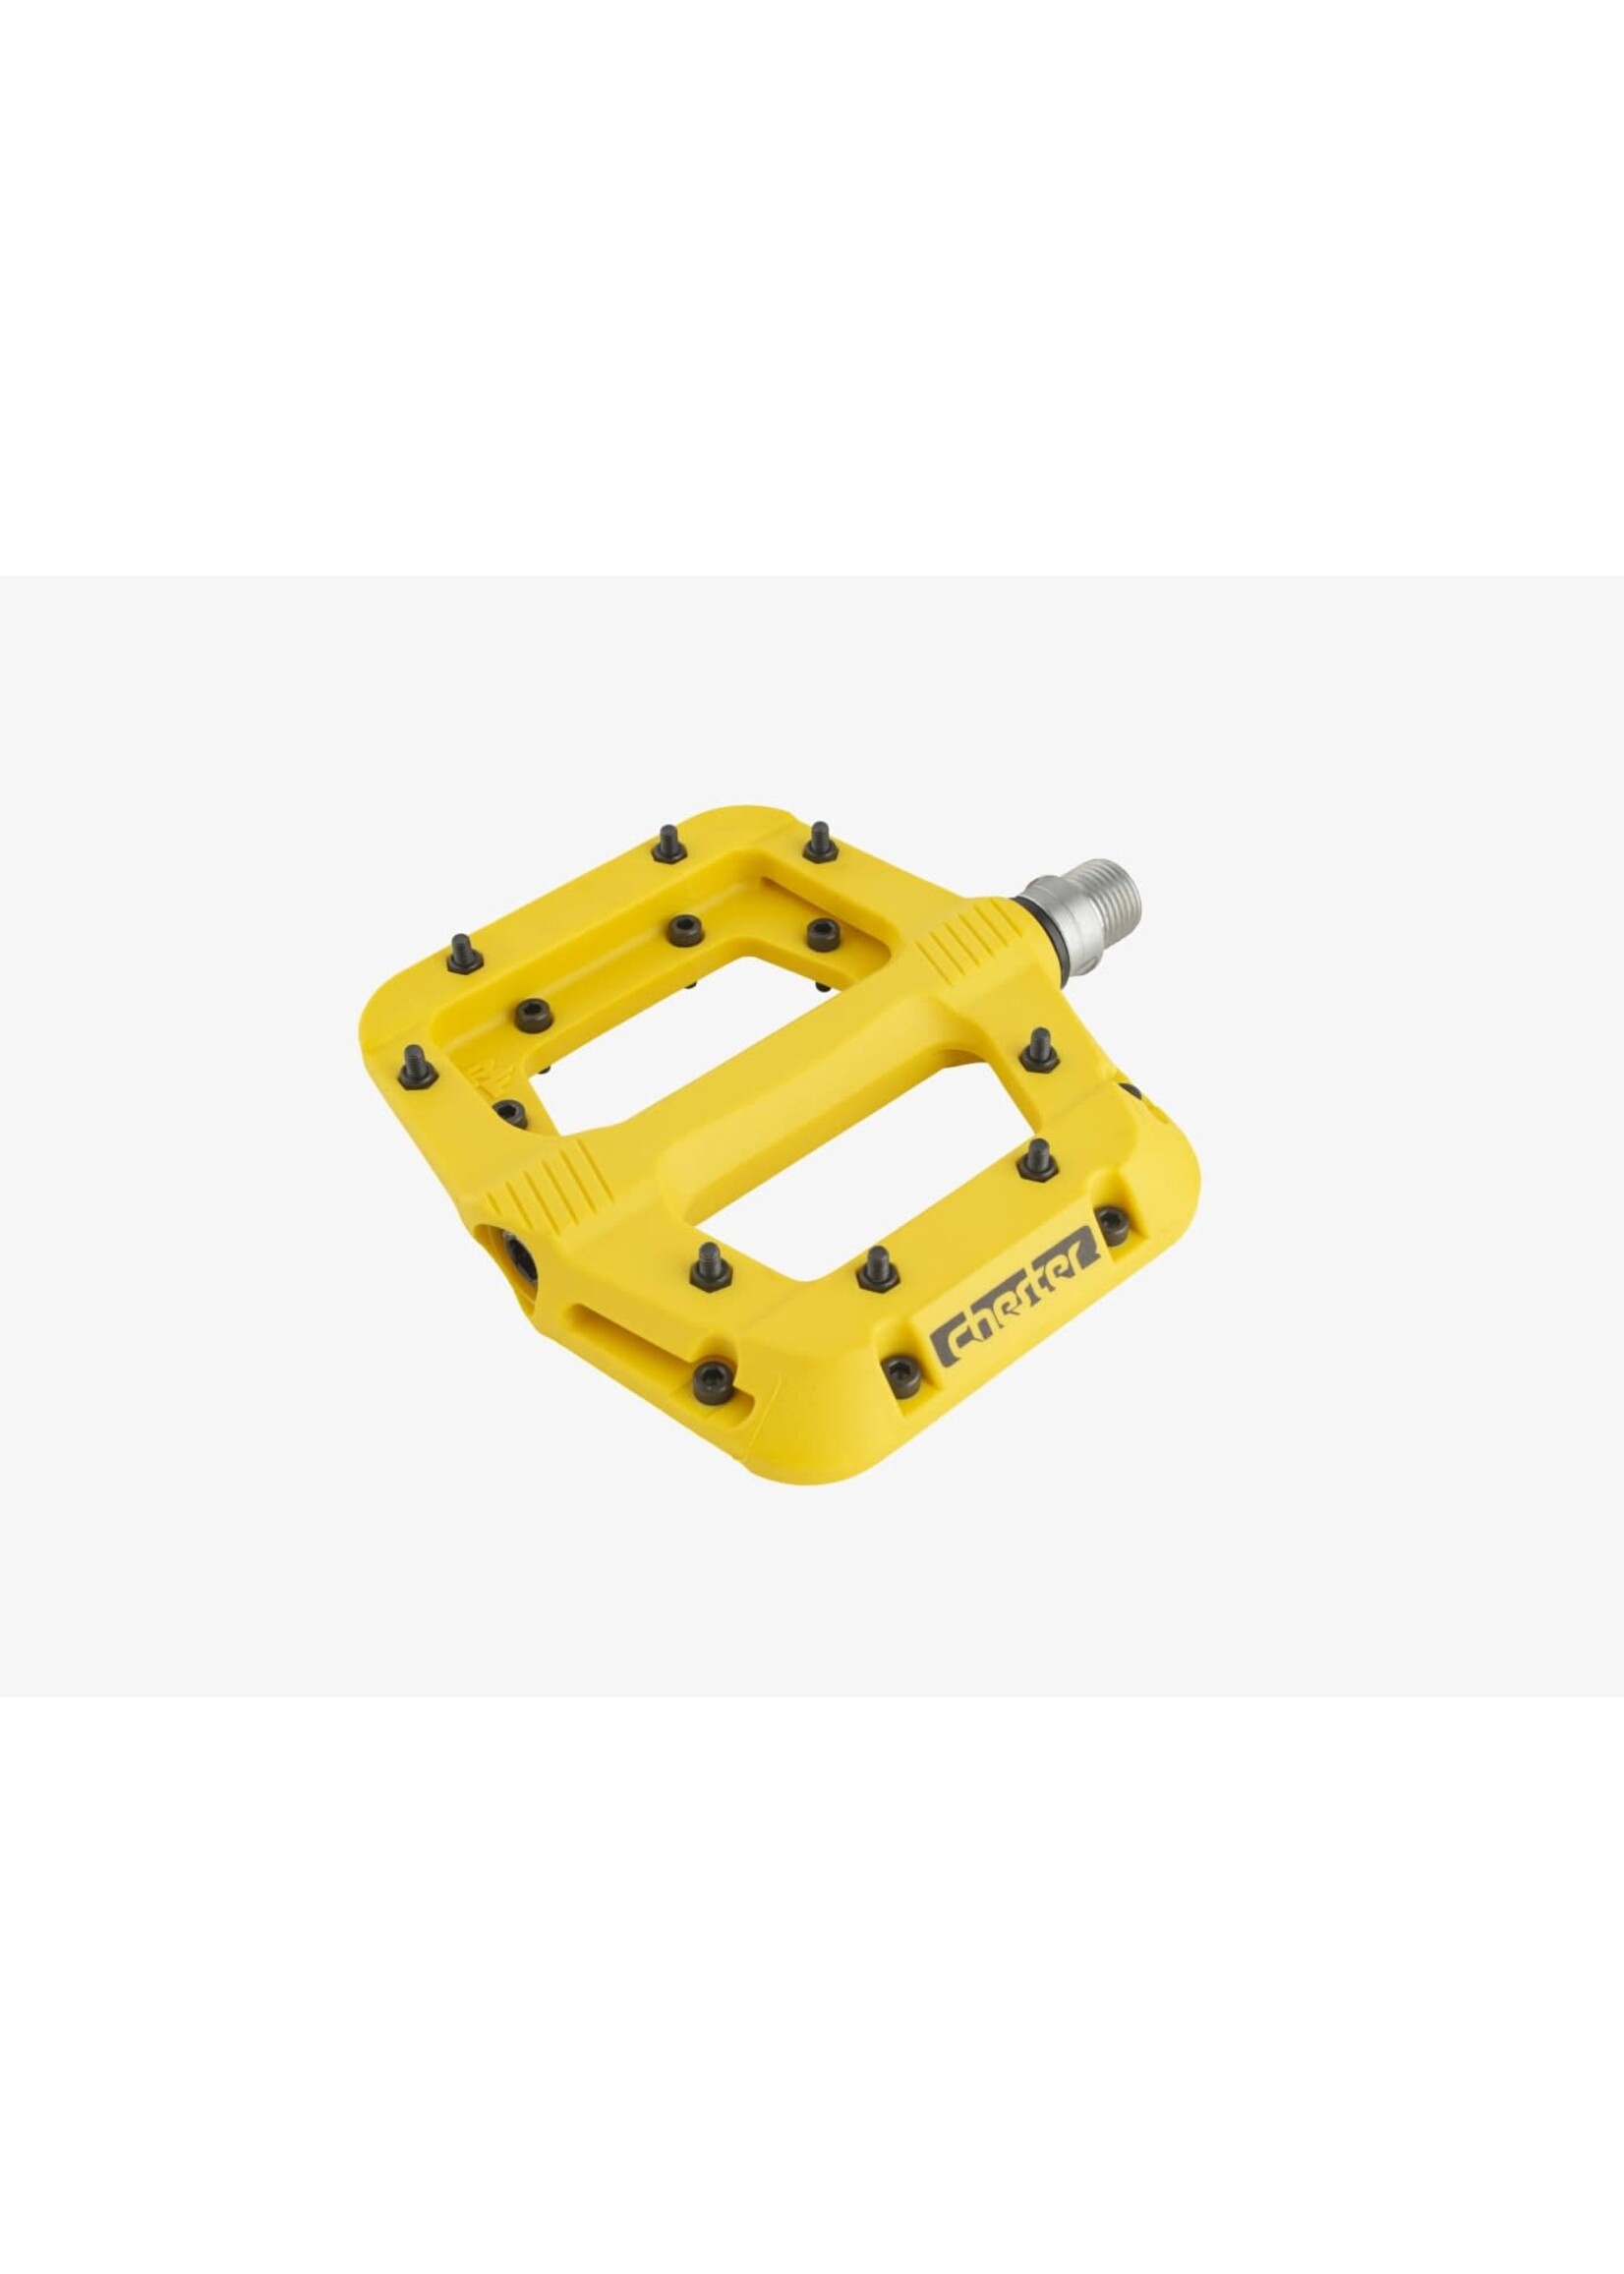 RaceFace Chester Pedals - Platform, Composite, Yellow